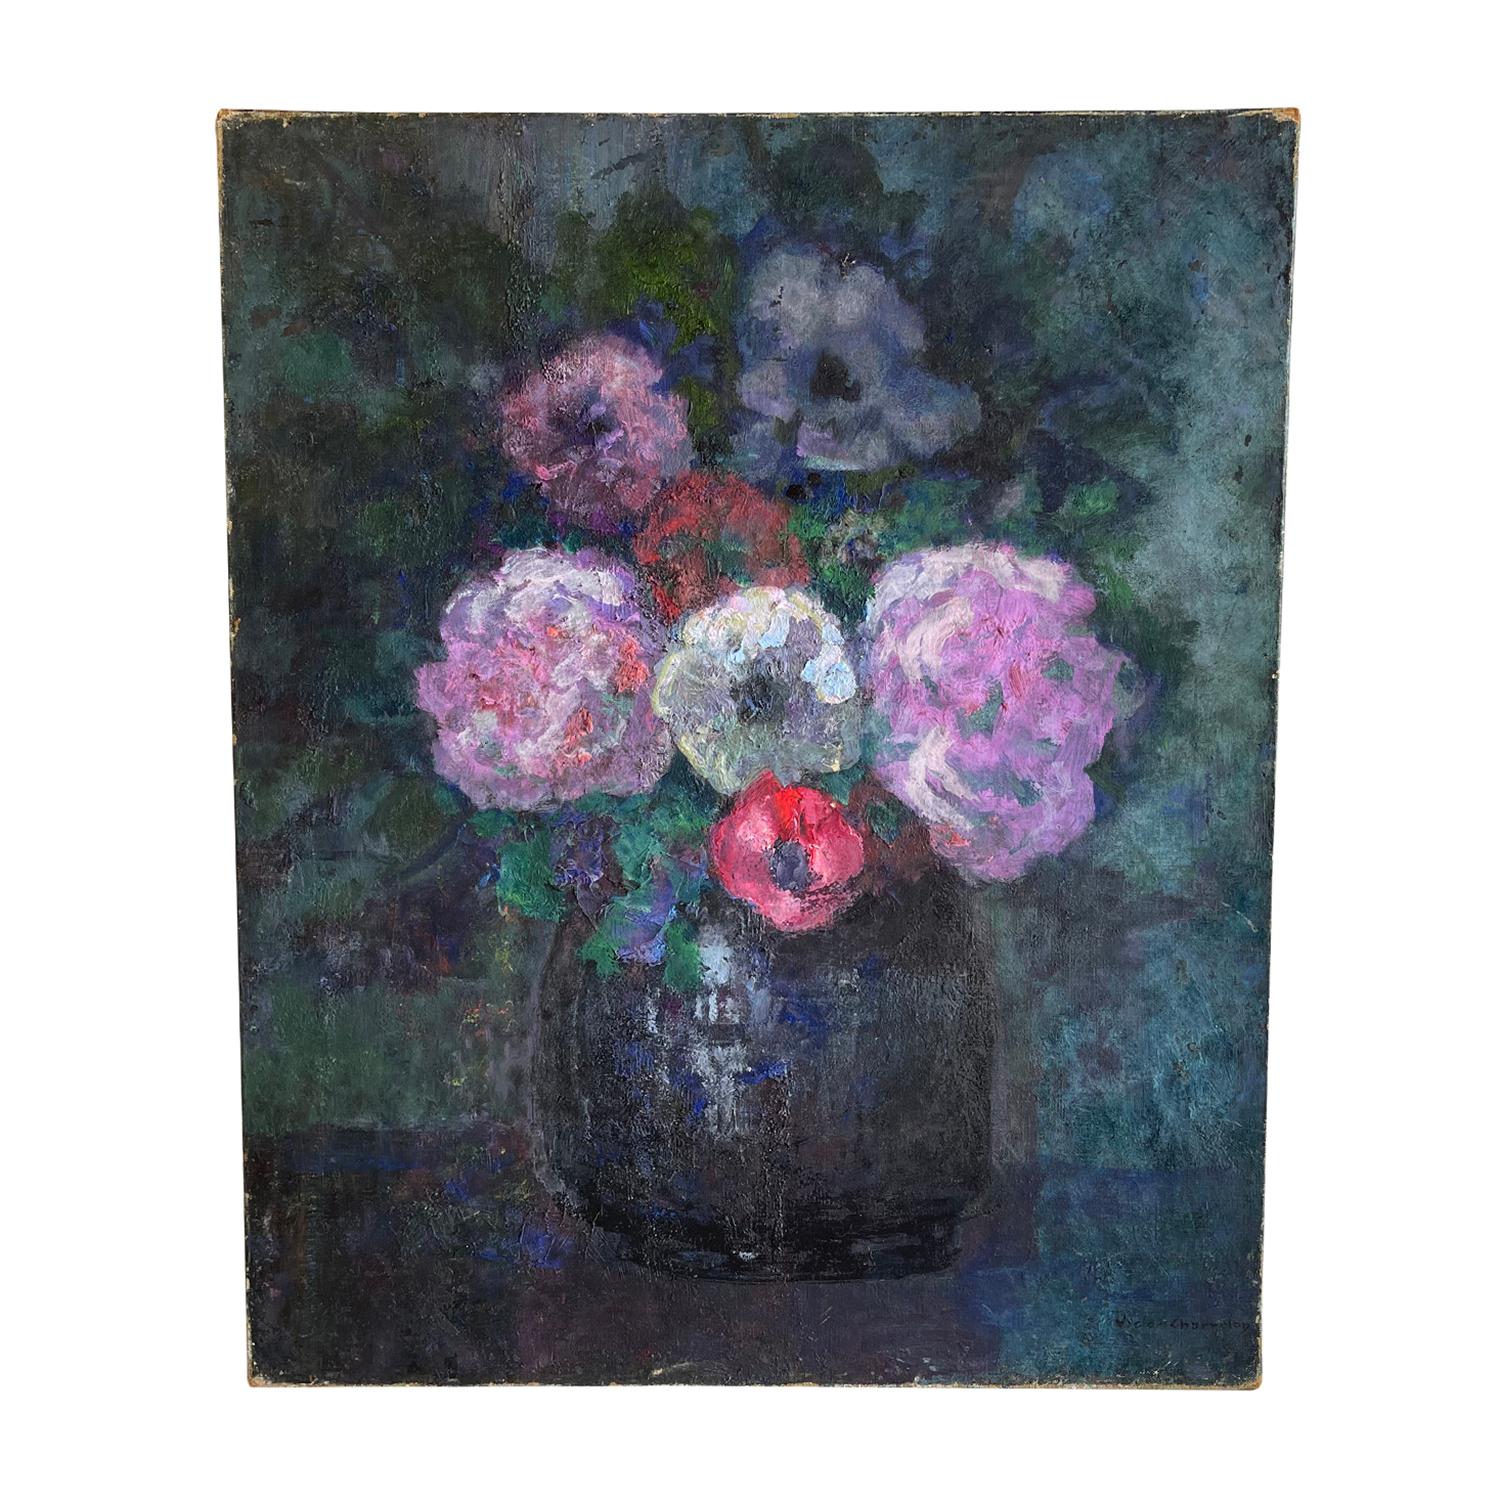 Belle Époque 20th Century French Vase of Colorful Flowers Oil Painting by Victor Charreton For Sale